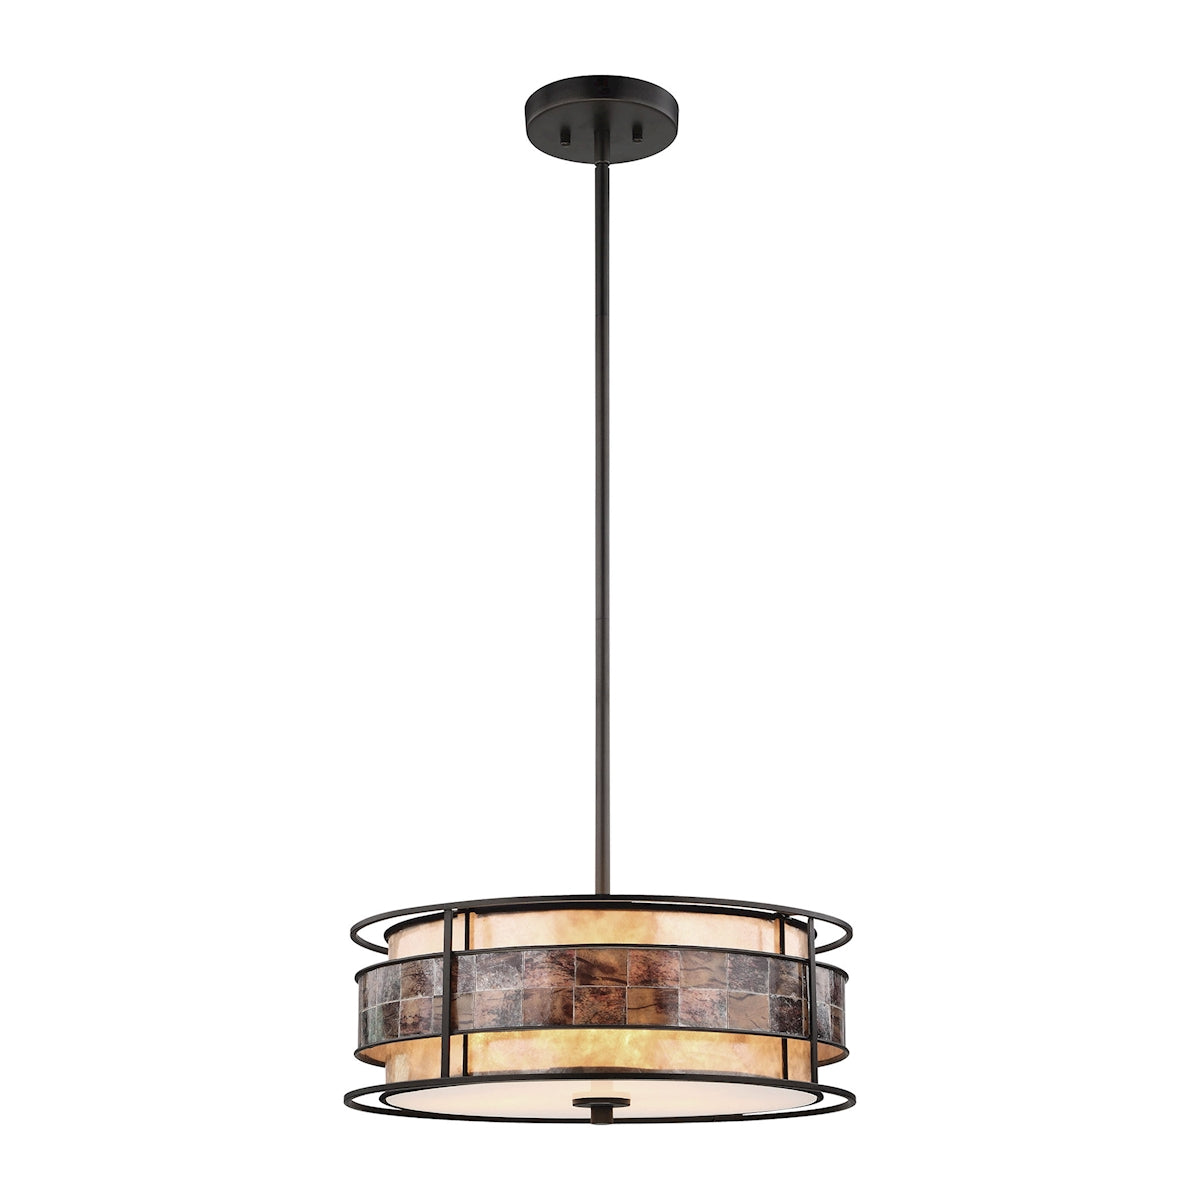 ELK Lighting 70263/3 Tremont 3-Light Chandelier in Tiffany Bronze with Brown Mosaic and Tan Mica Shade